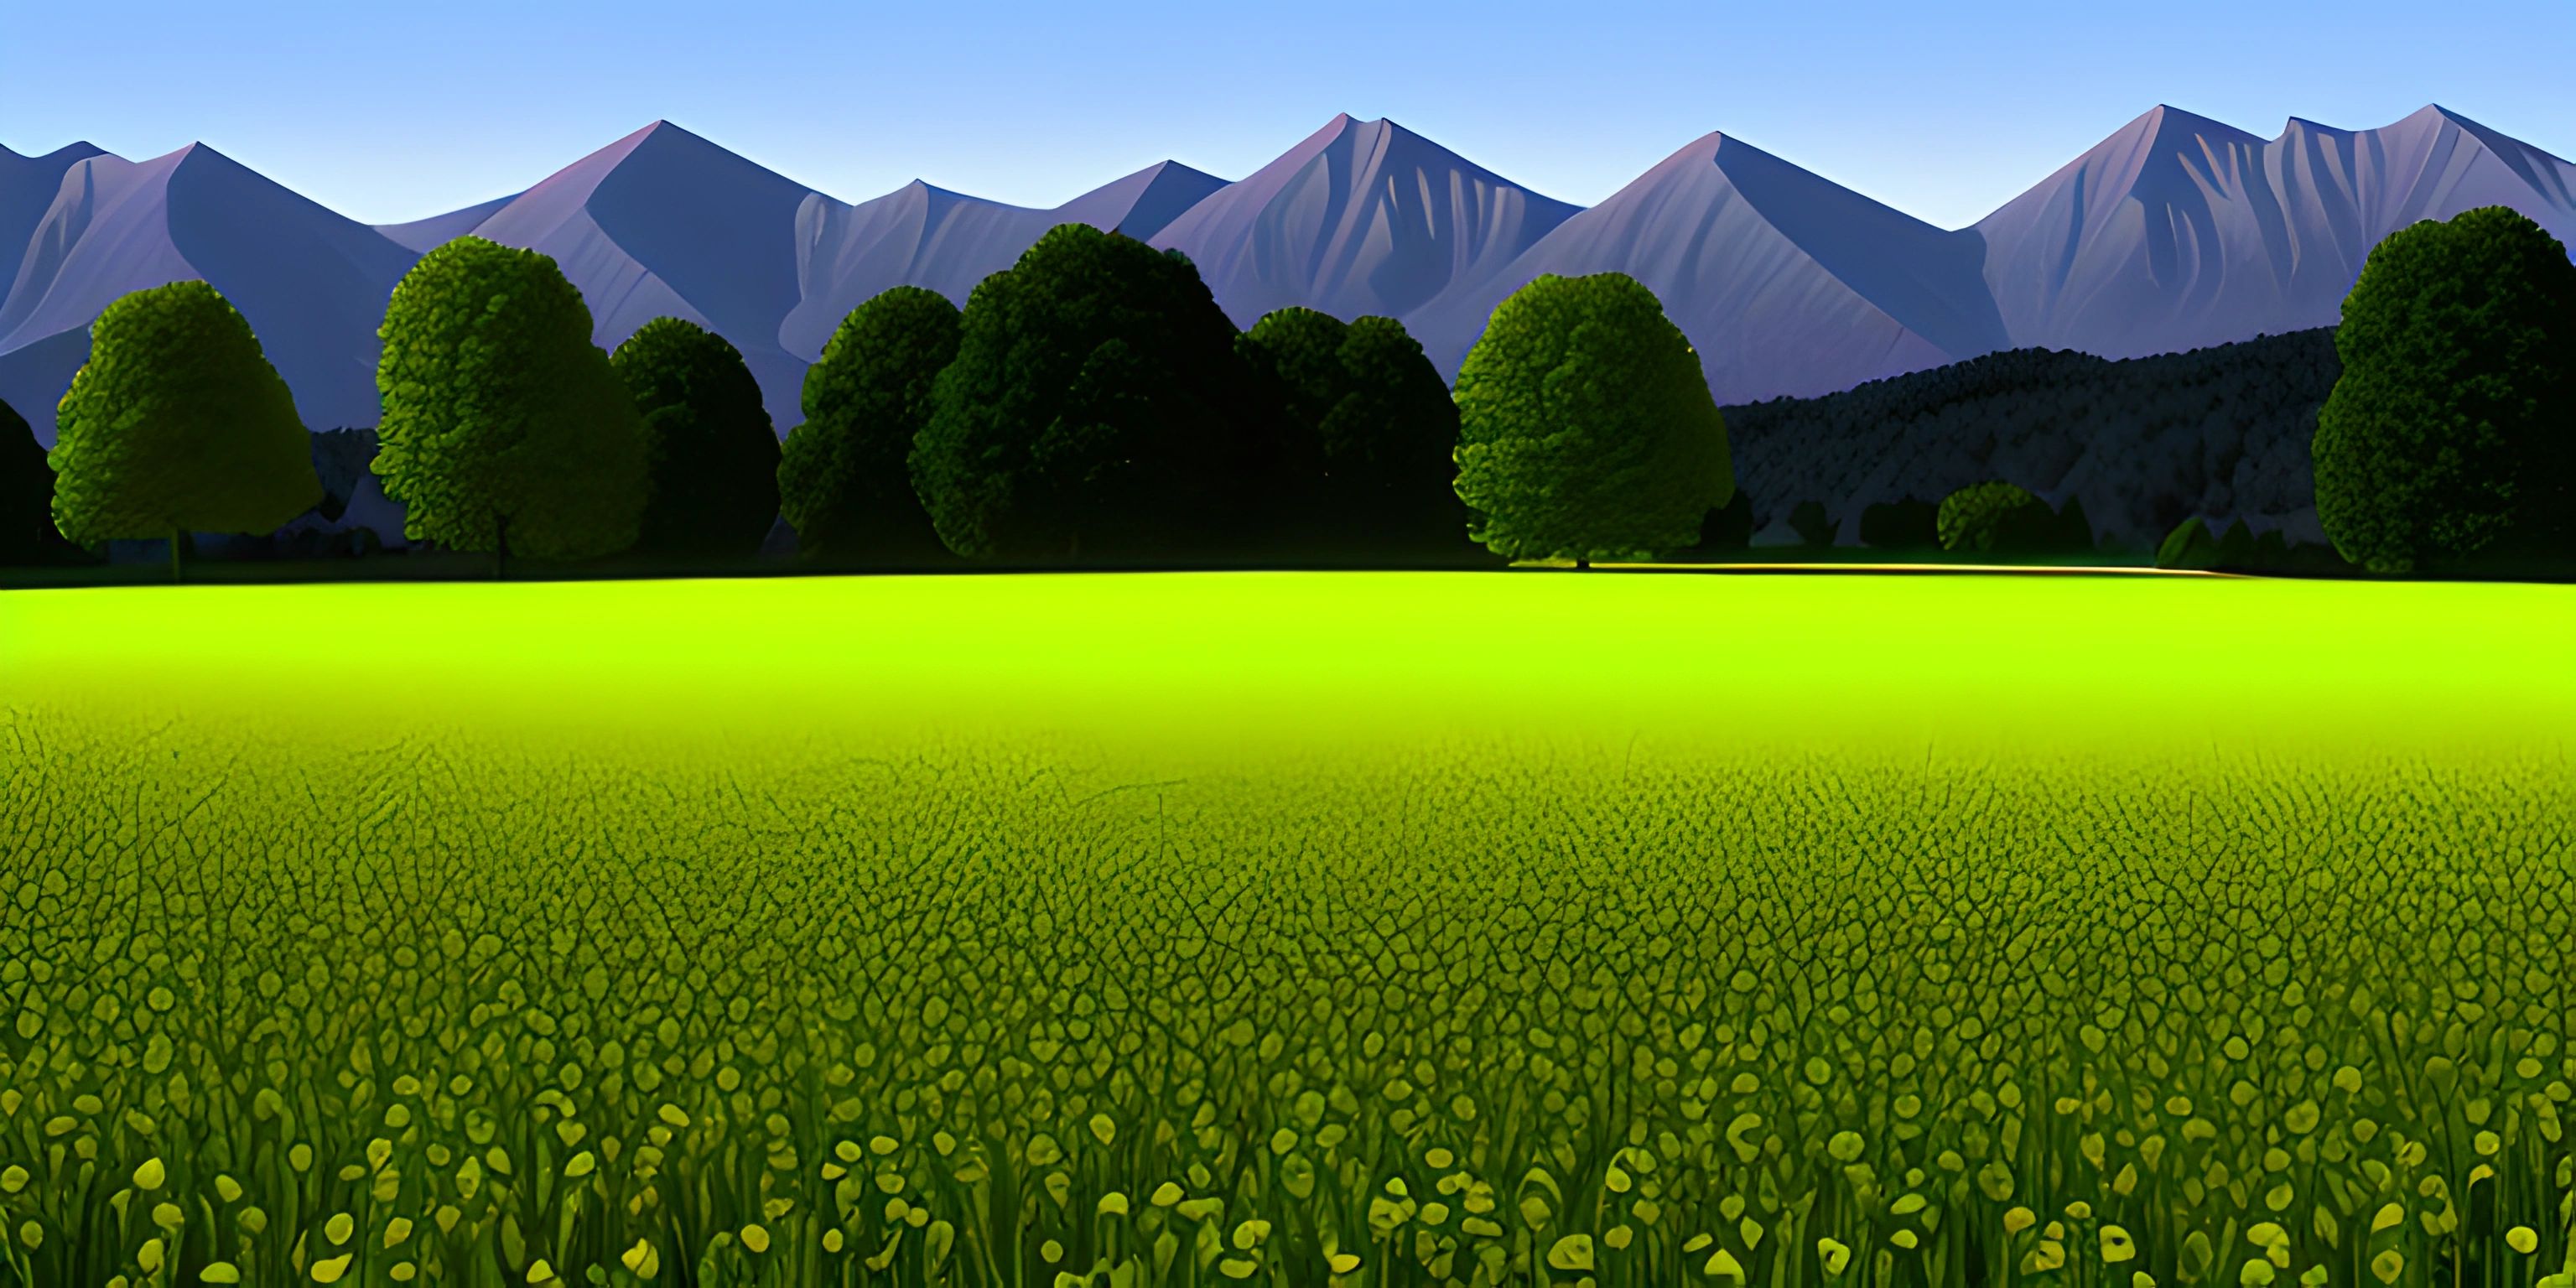 a colorful illustration of mountains on the background and an empty field in front of them